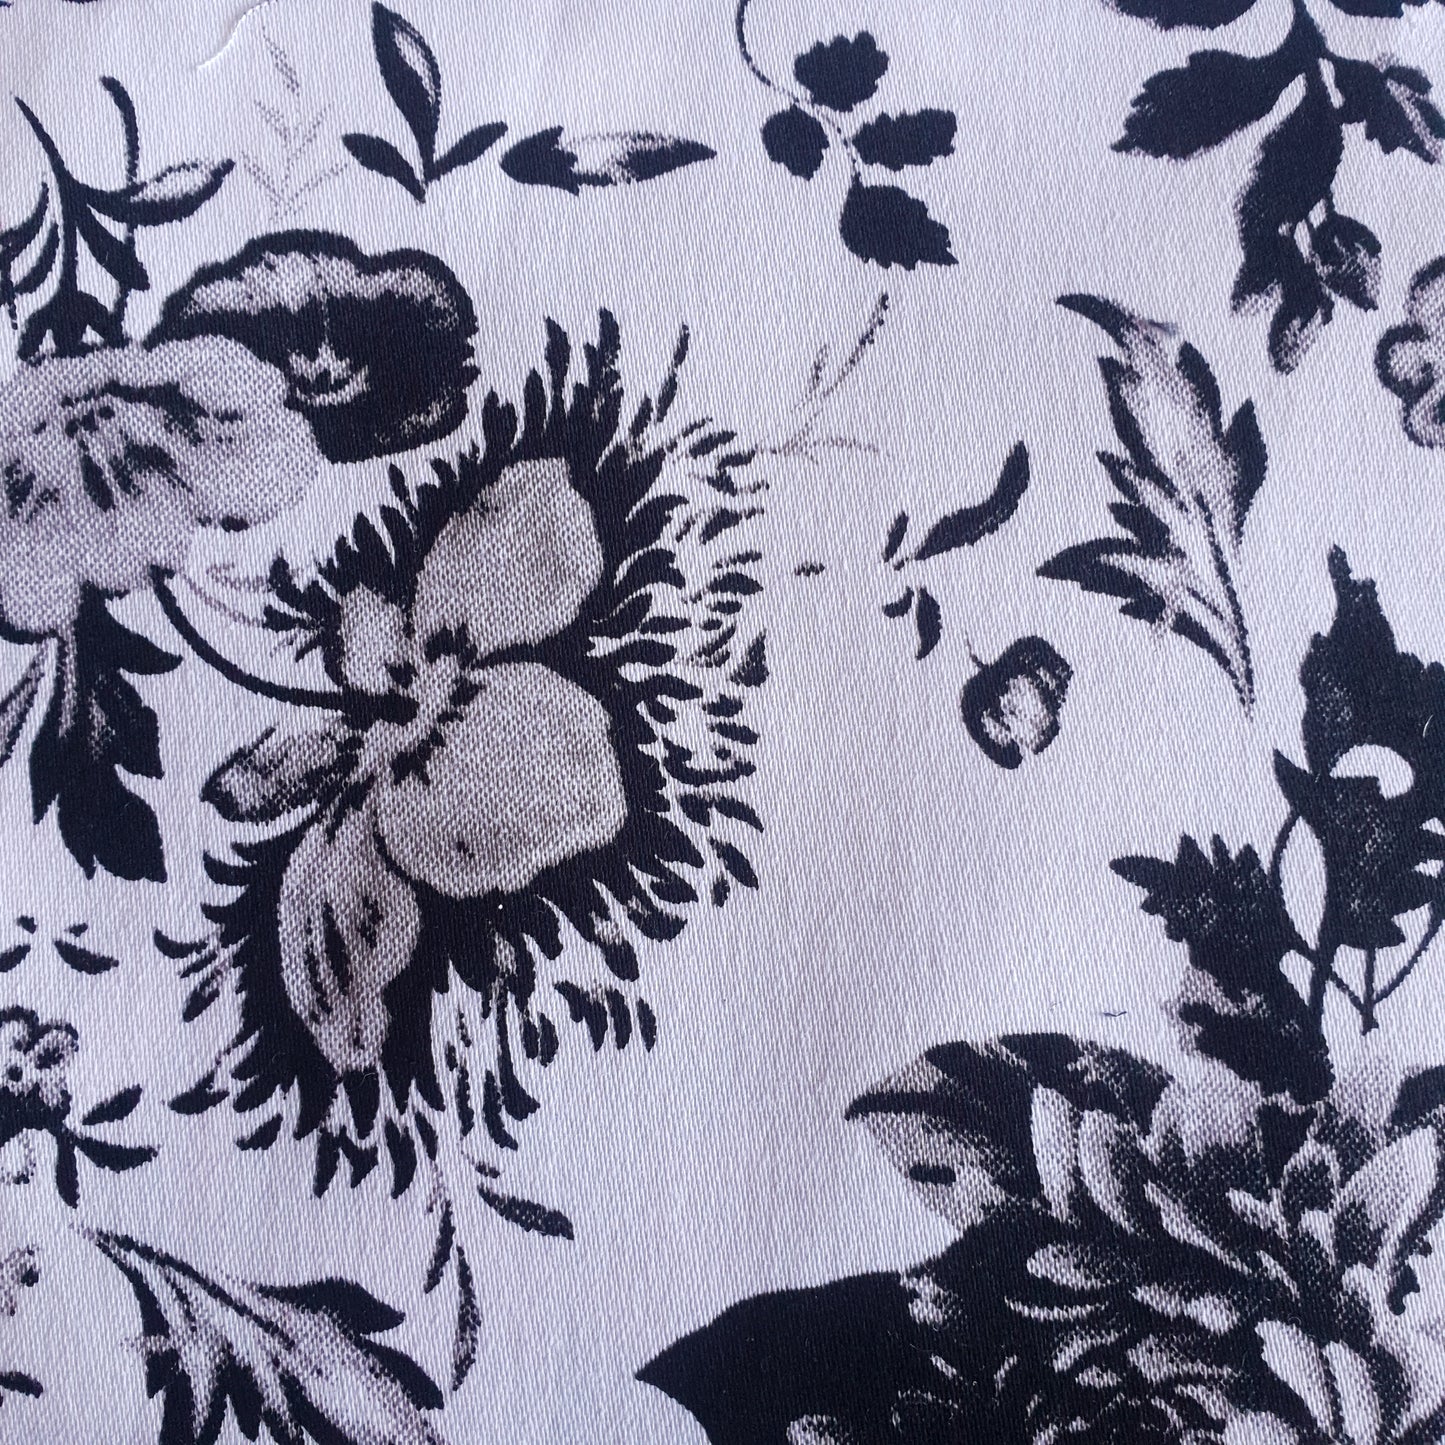 Black, White and Grey Floral Cotton Spandex Fabric - You’ve Got Me In Stitches